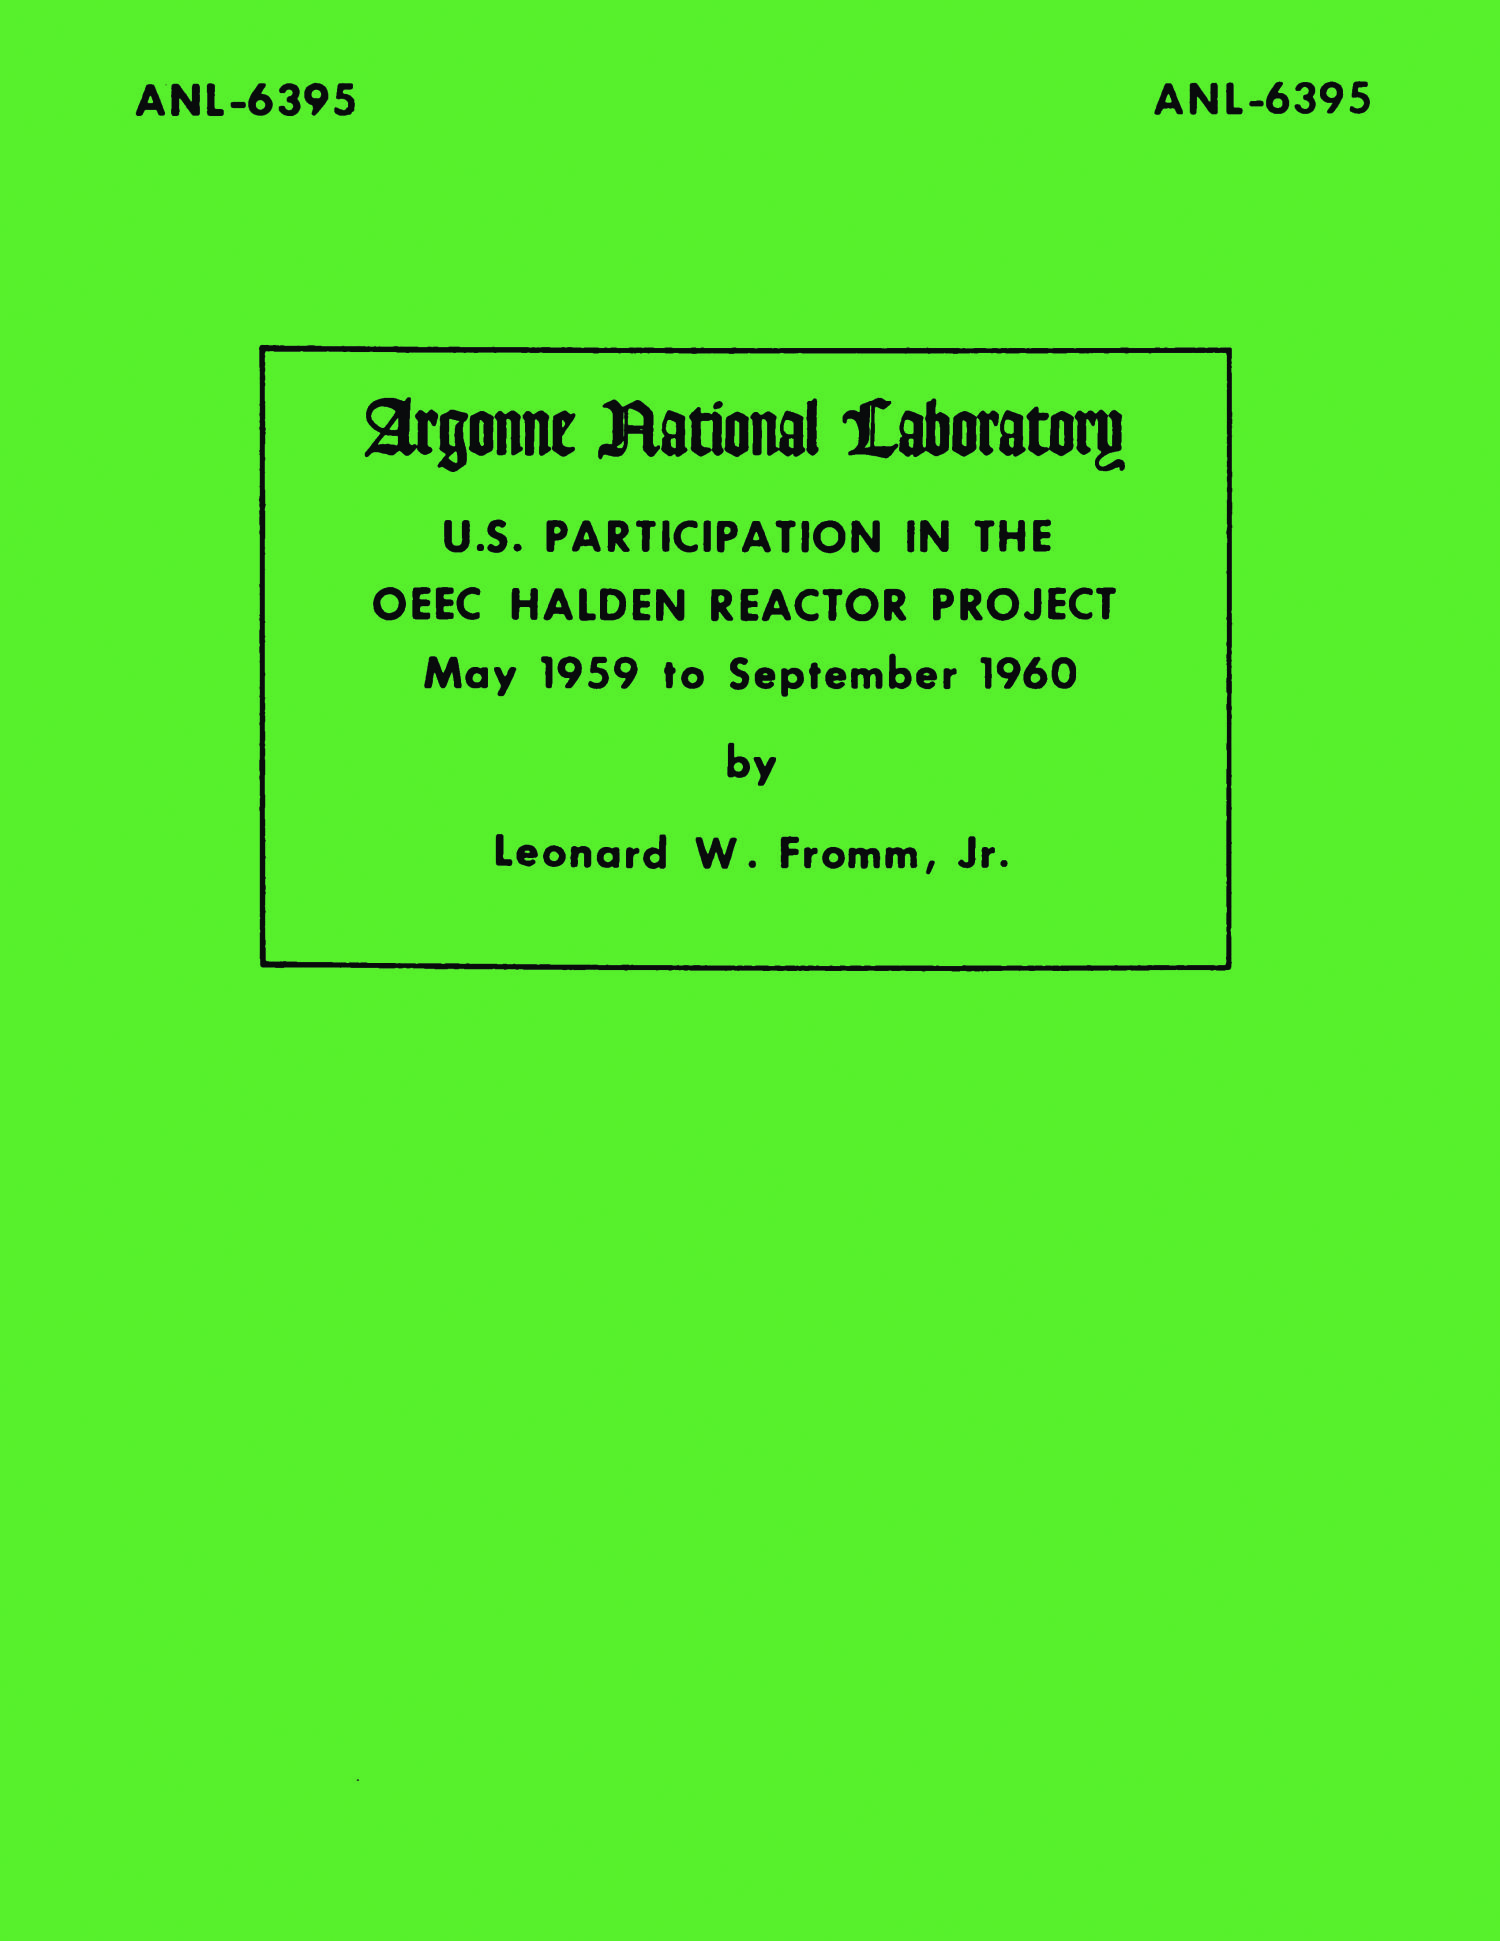 U.S. Participation in the OEEC Halden Reactor Project May 1959 to September 1960
                                                
                                                    I
                                                